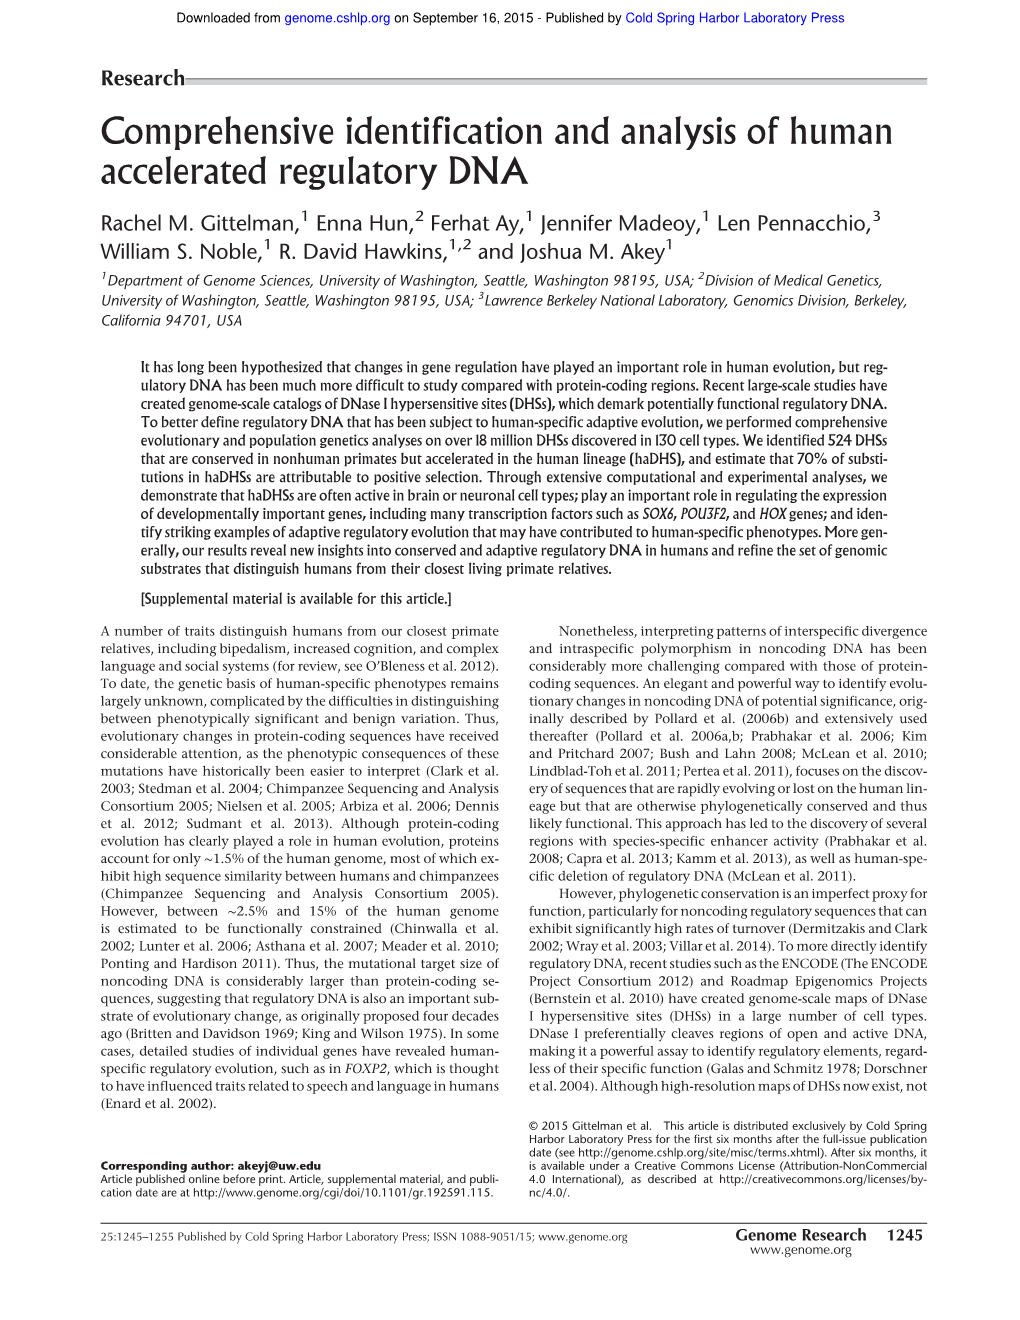 Comprehensive Identification and Analysis of Human Accelerated Regulatory DNA